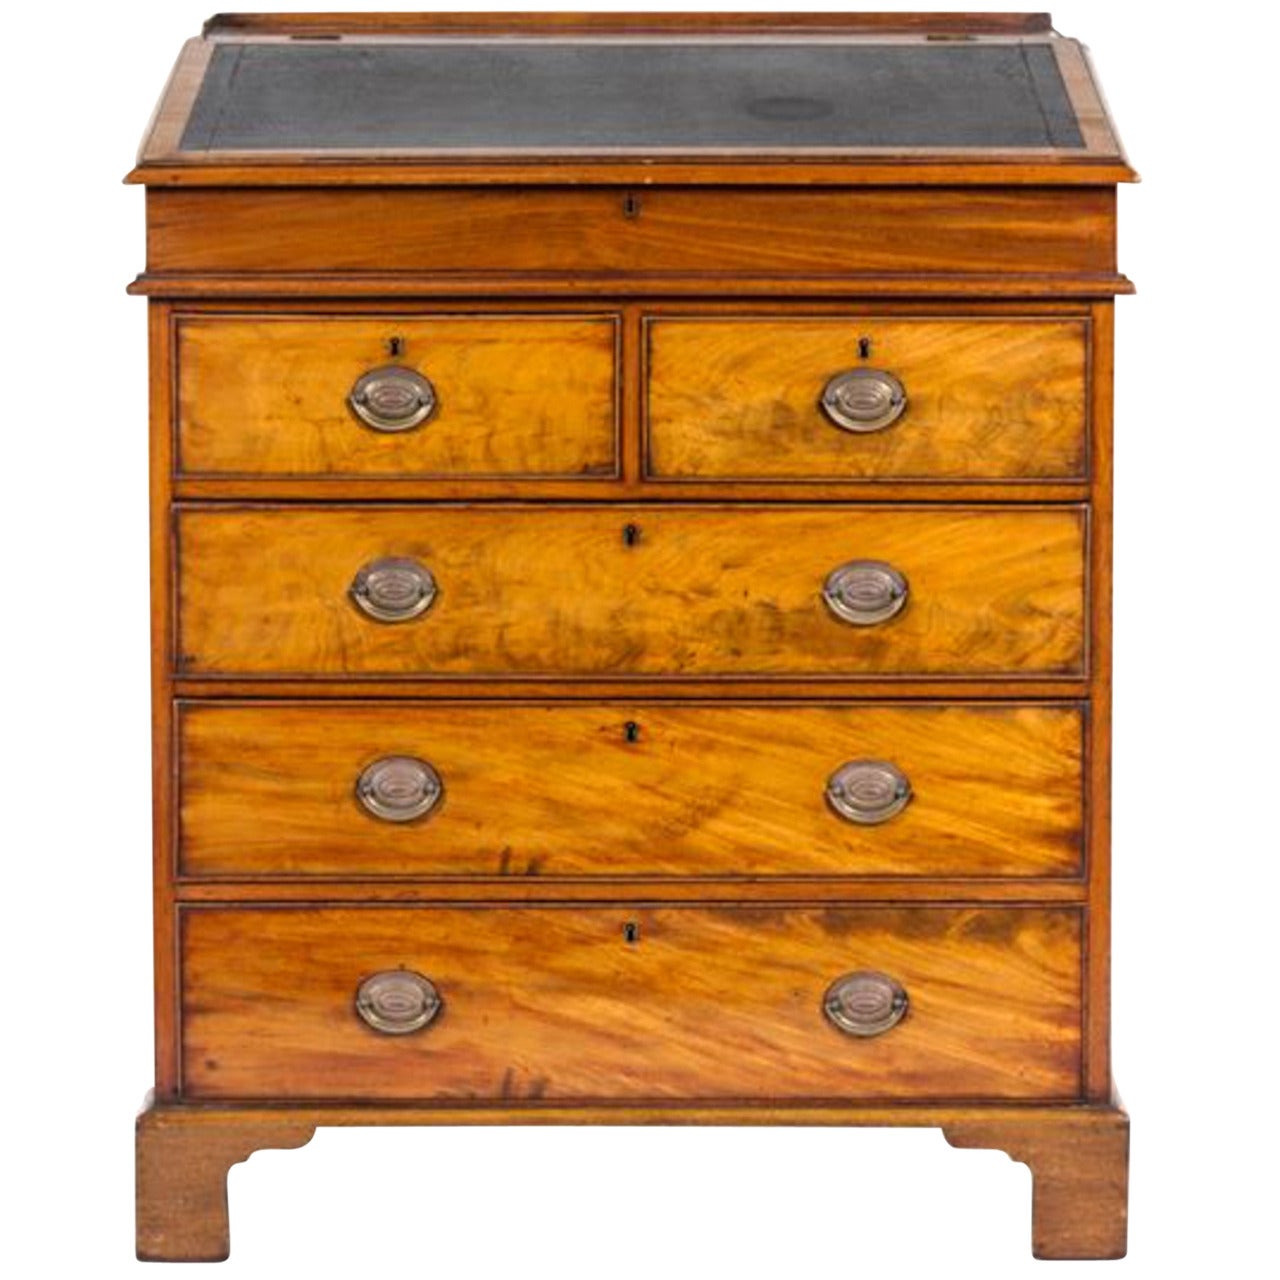 George III Mahogany Standing Bureau,  Great Library Accent Piece, Good Color.